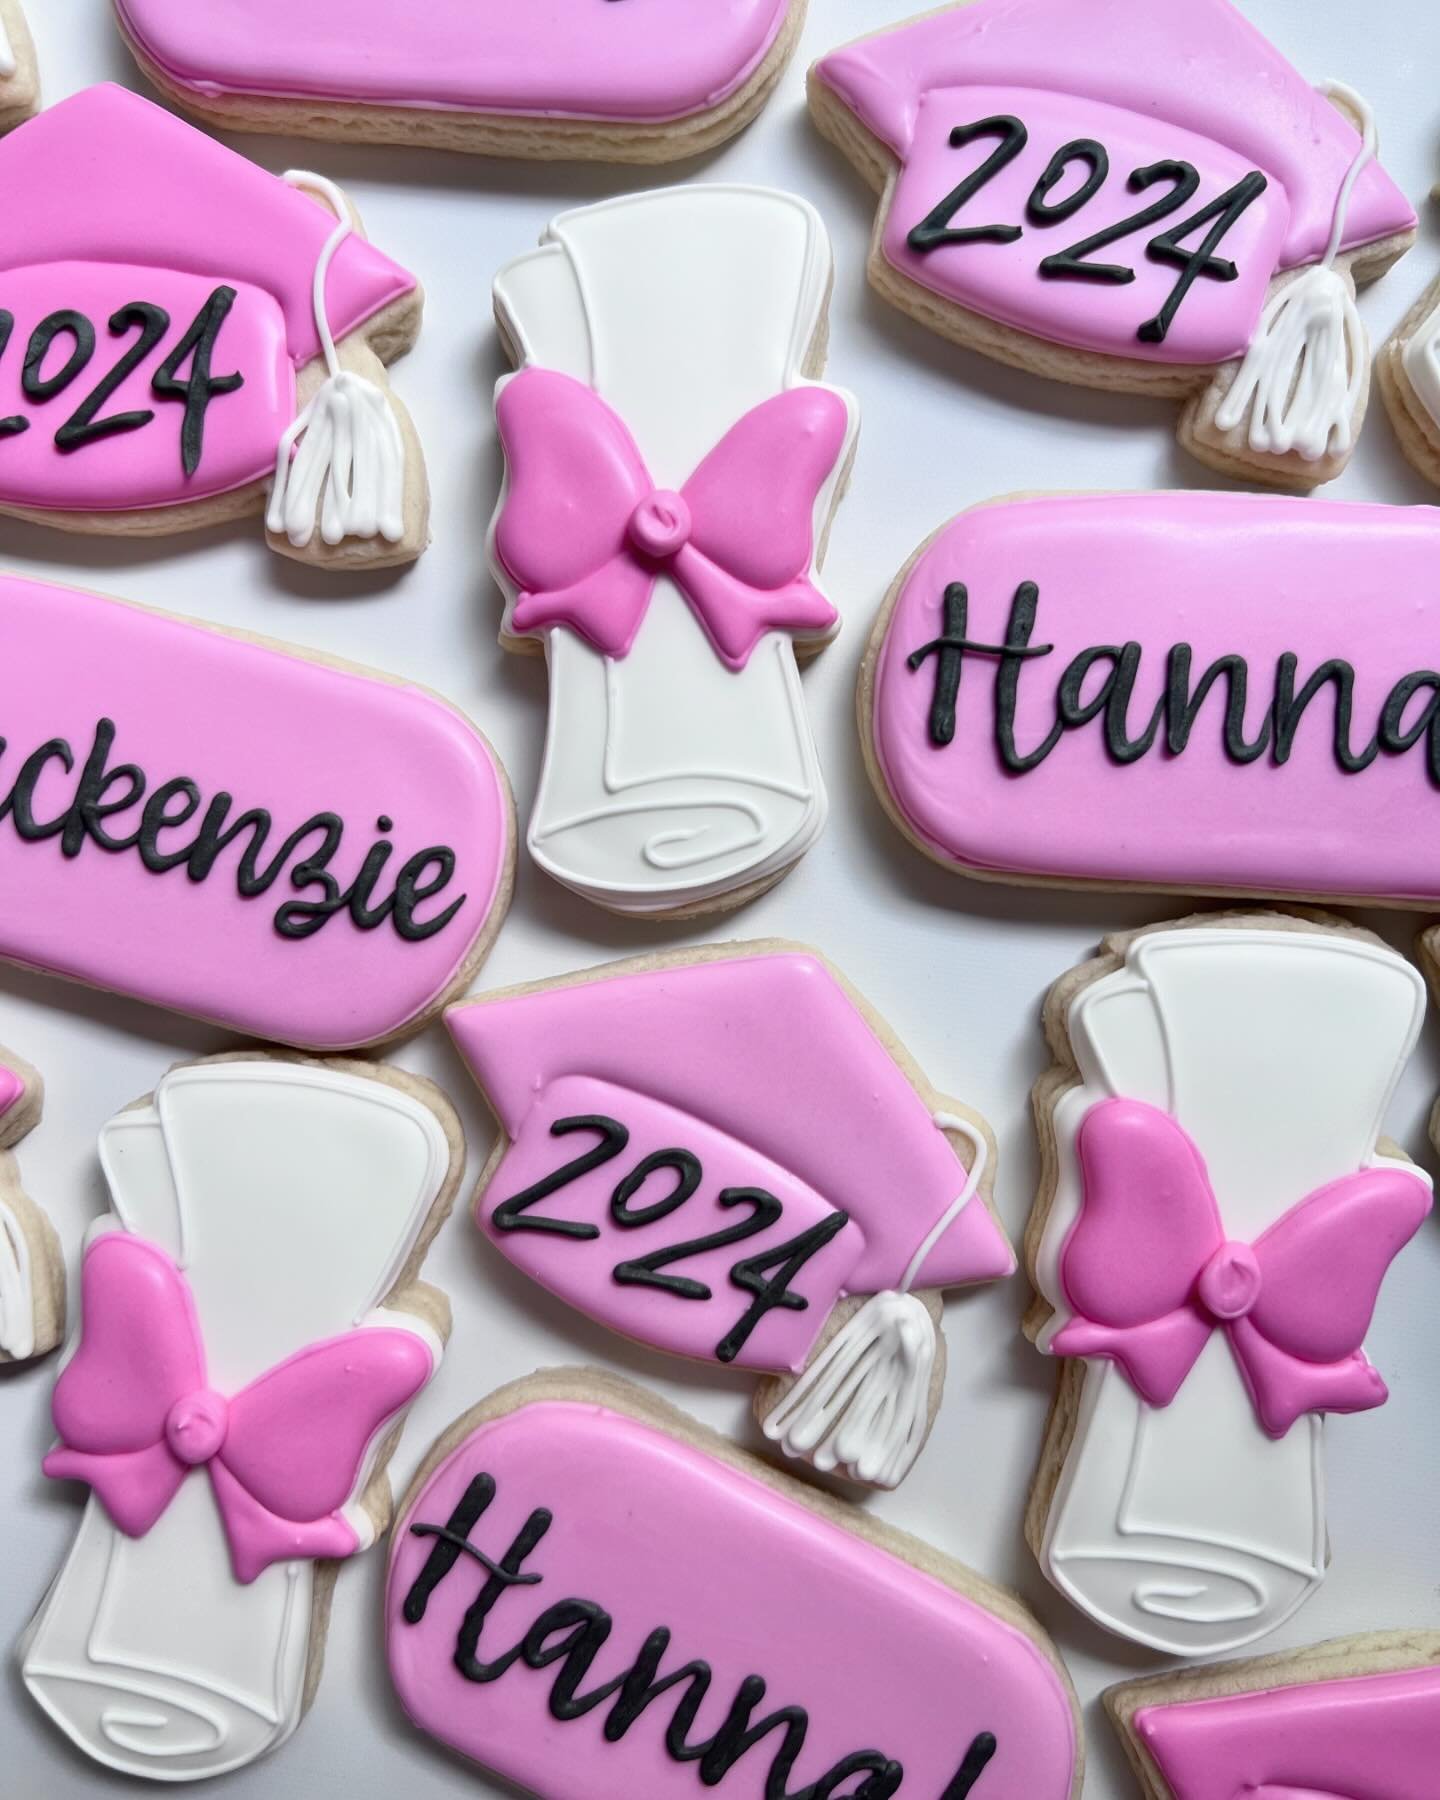 Grad season is in full effect here! Have you ordered treats for your grad yet!?